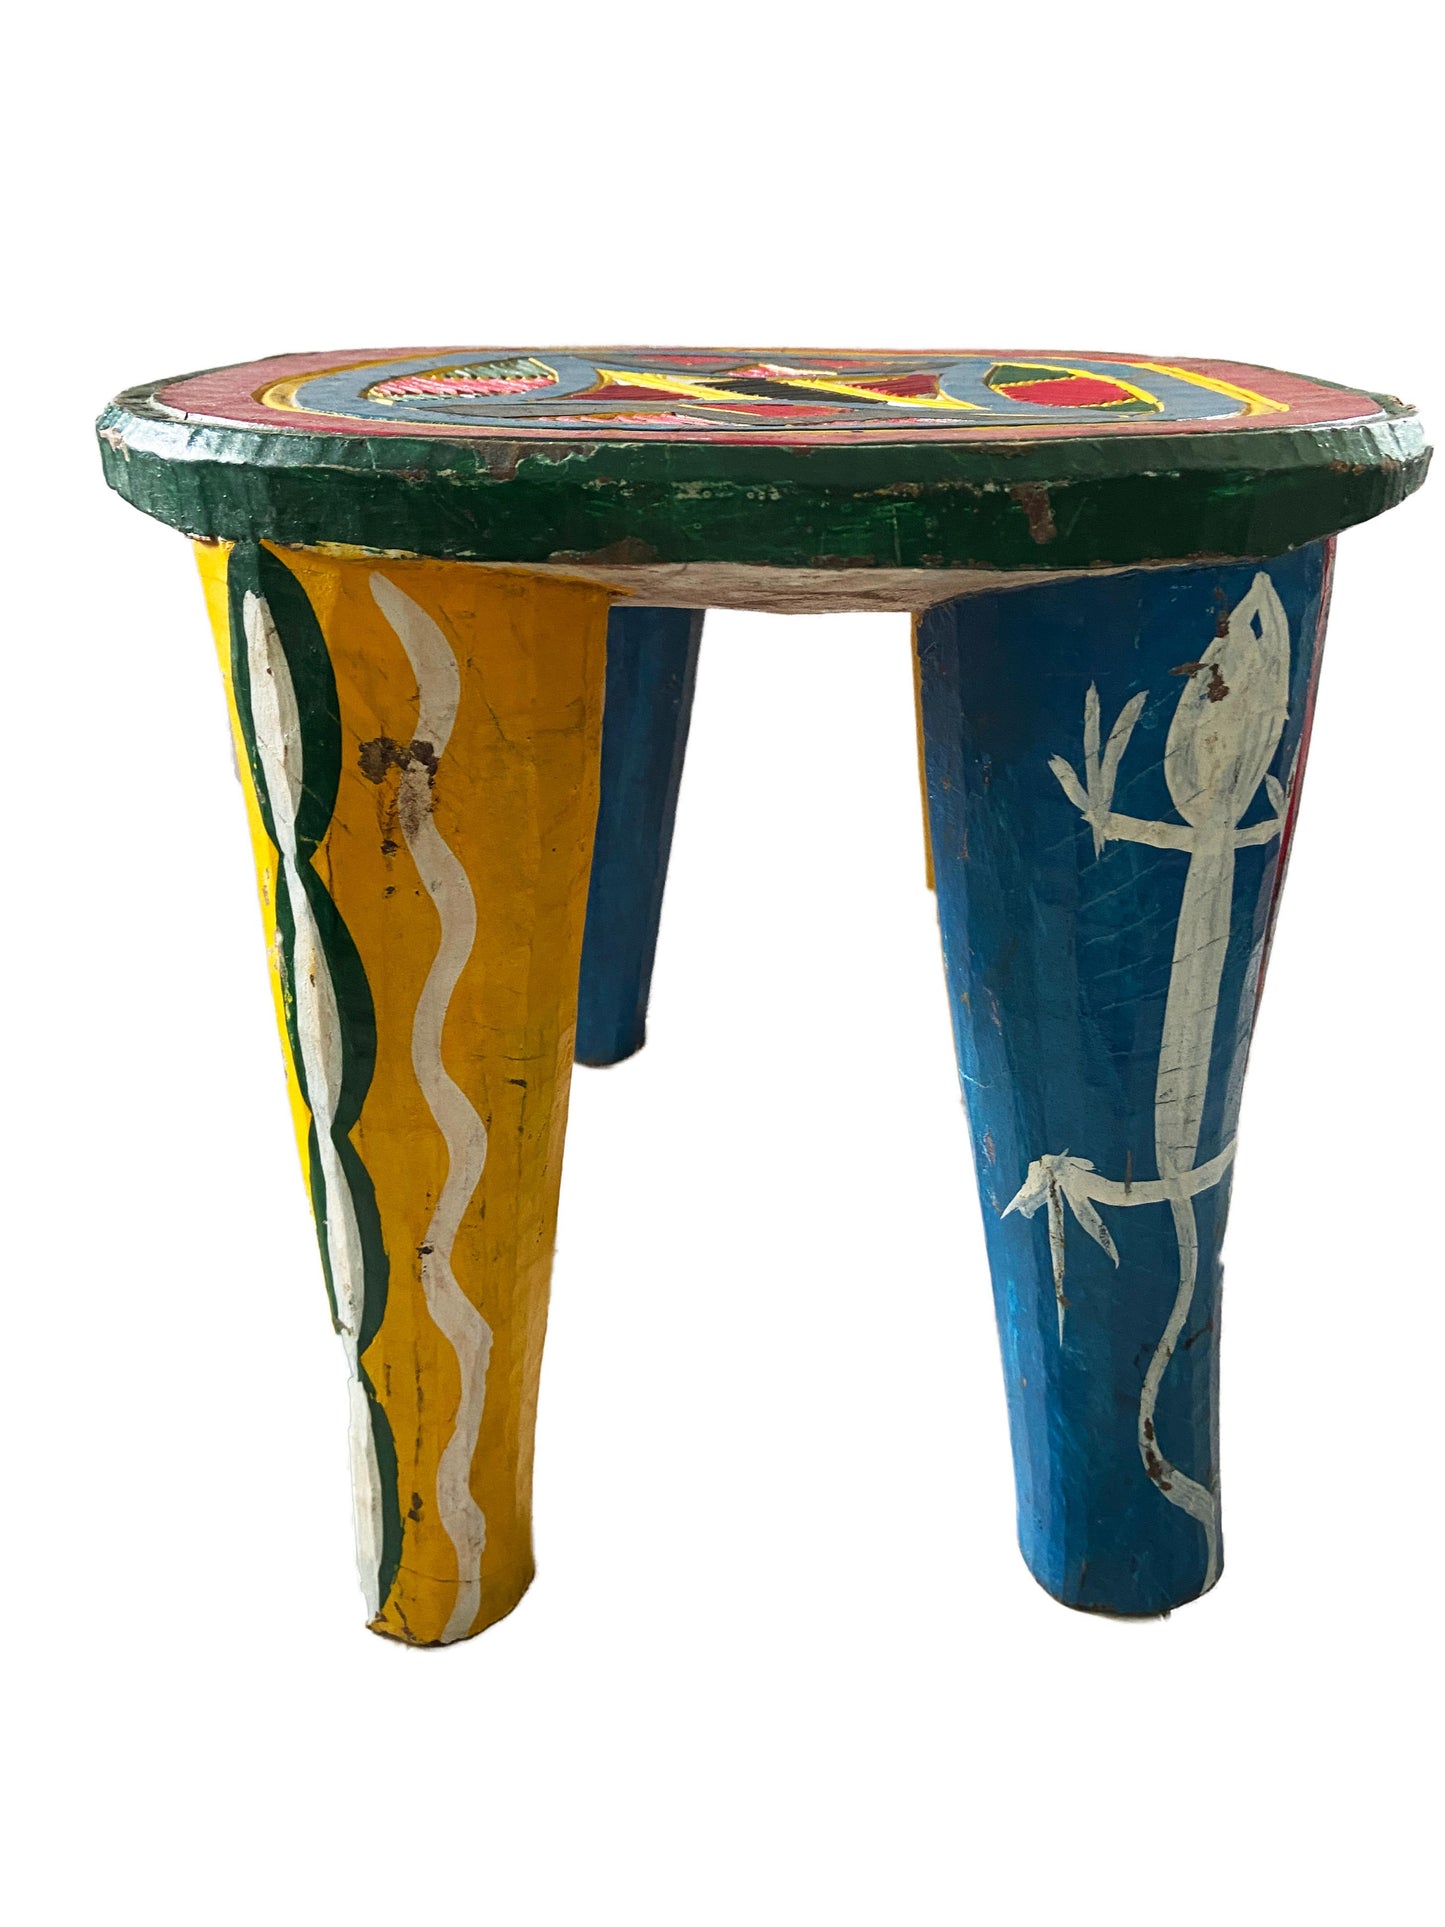 #3554 Superb African LG Colorful Nupe Stool Nigeria 12" h